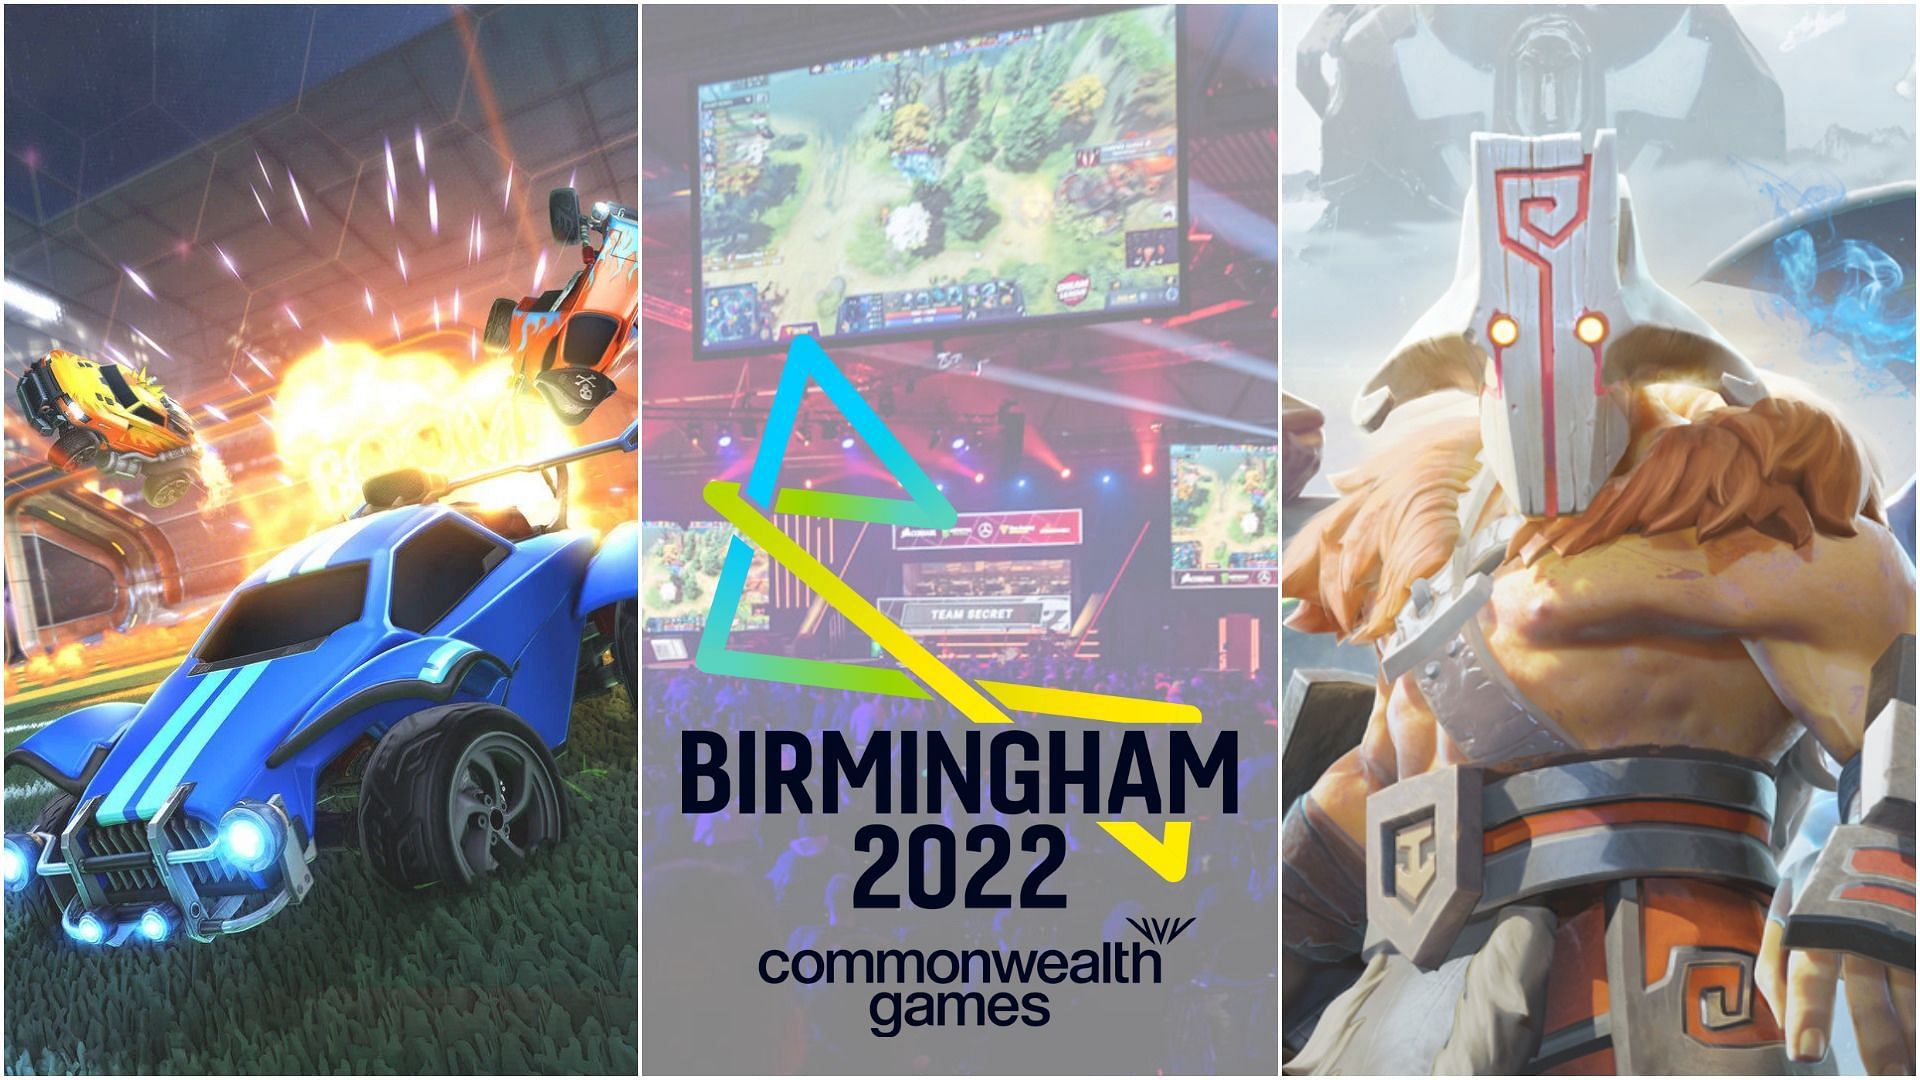 The Commonwealth Games 2022 esports championships will feature the likes of DOTA 2 and Rocket League (Images via Rocket League, Getty, DOTA 2)